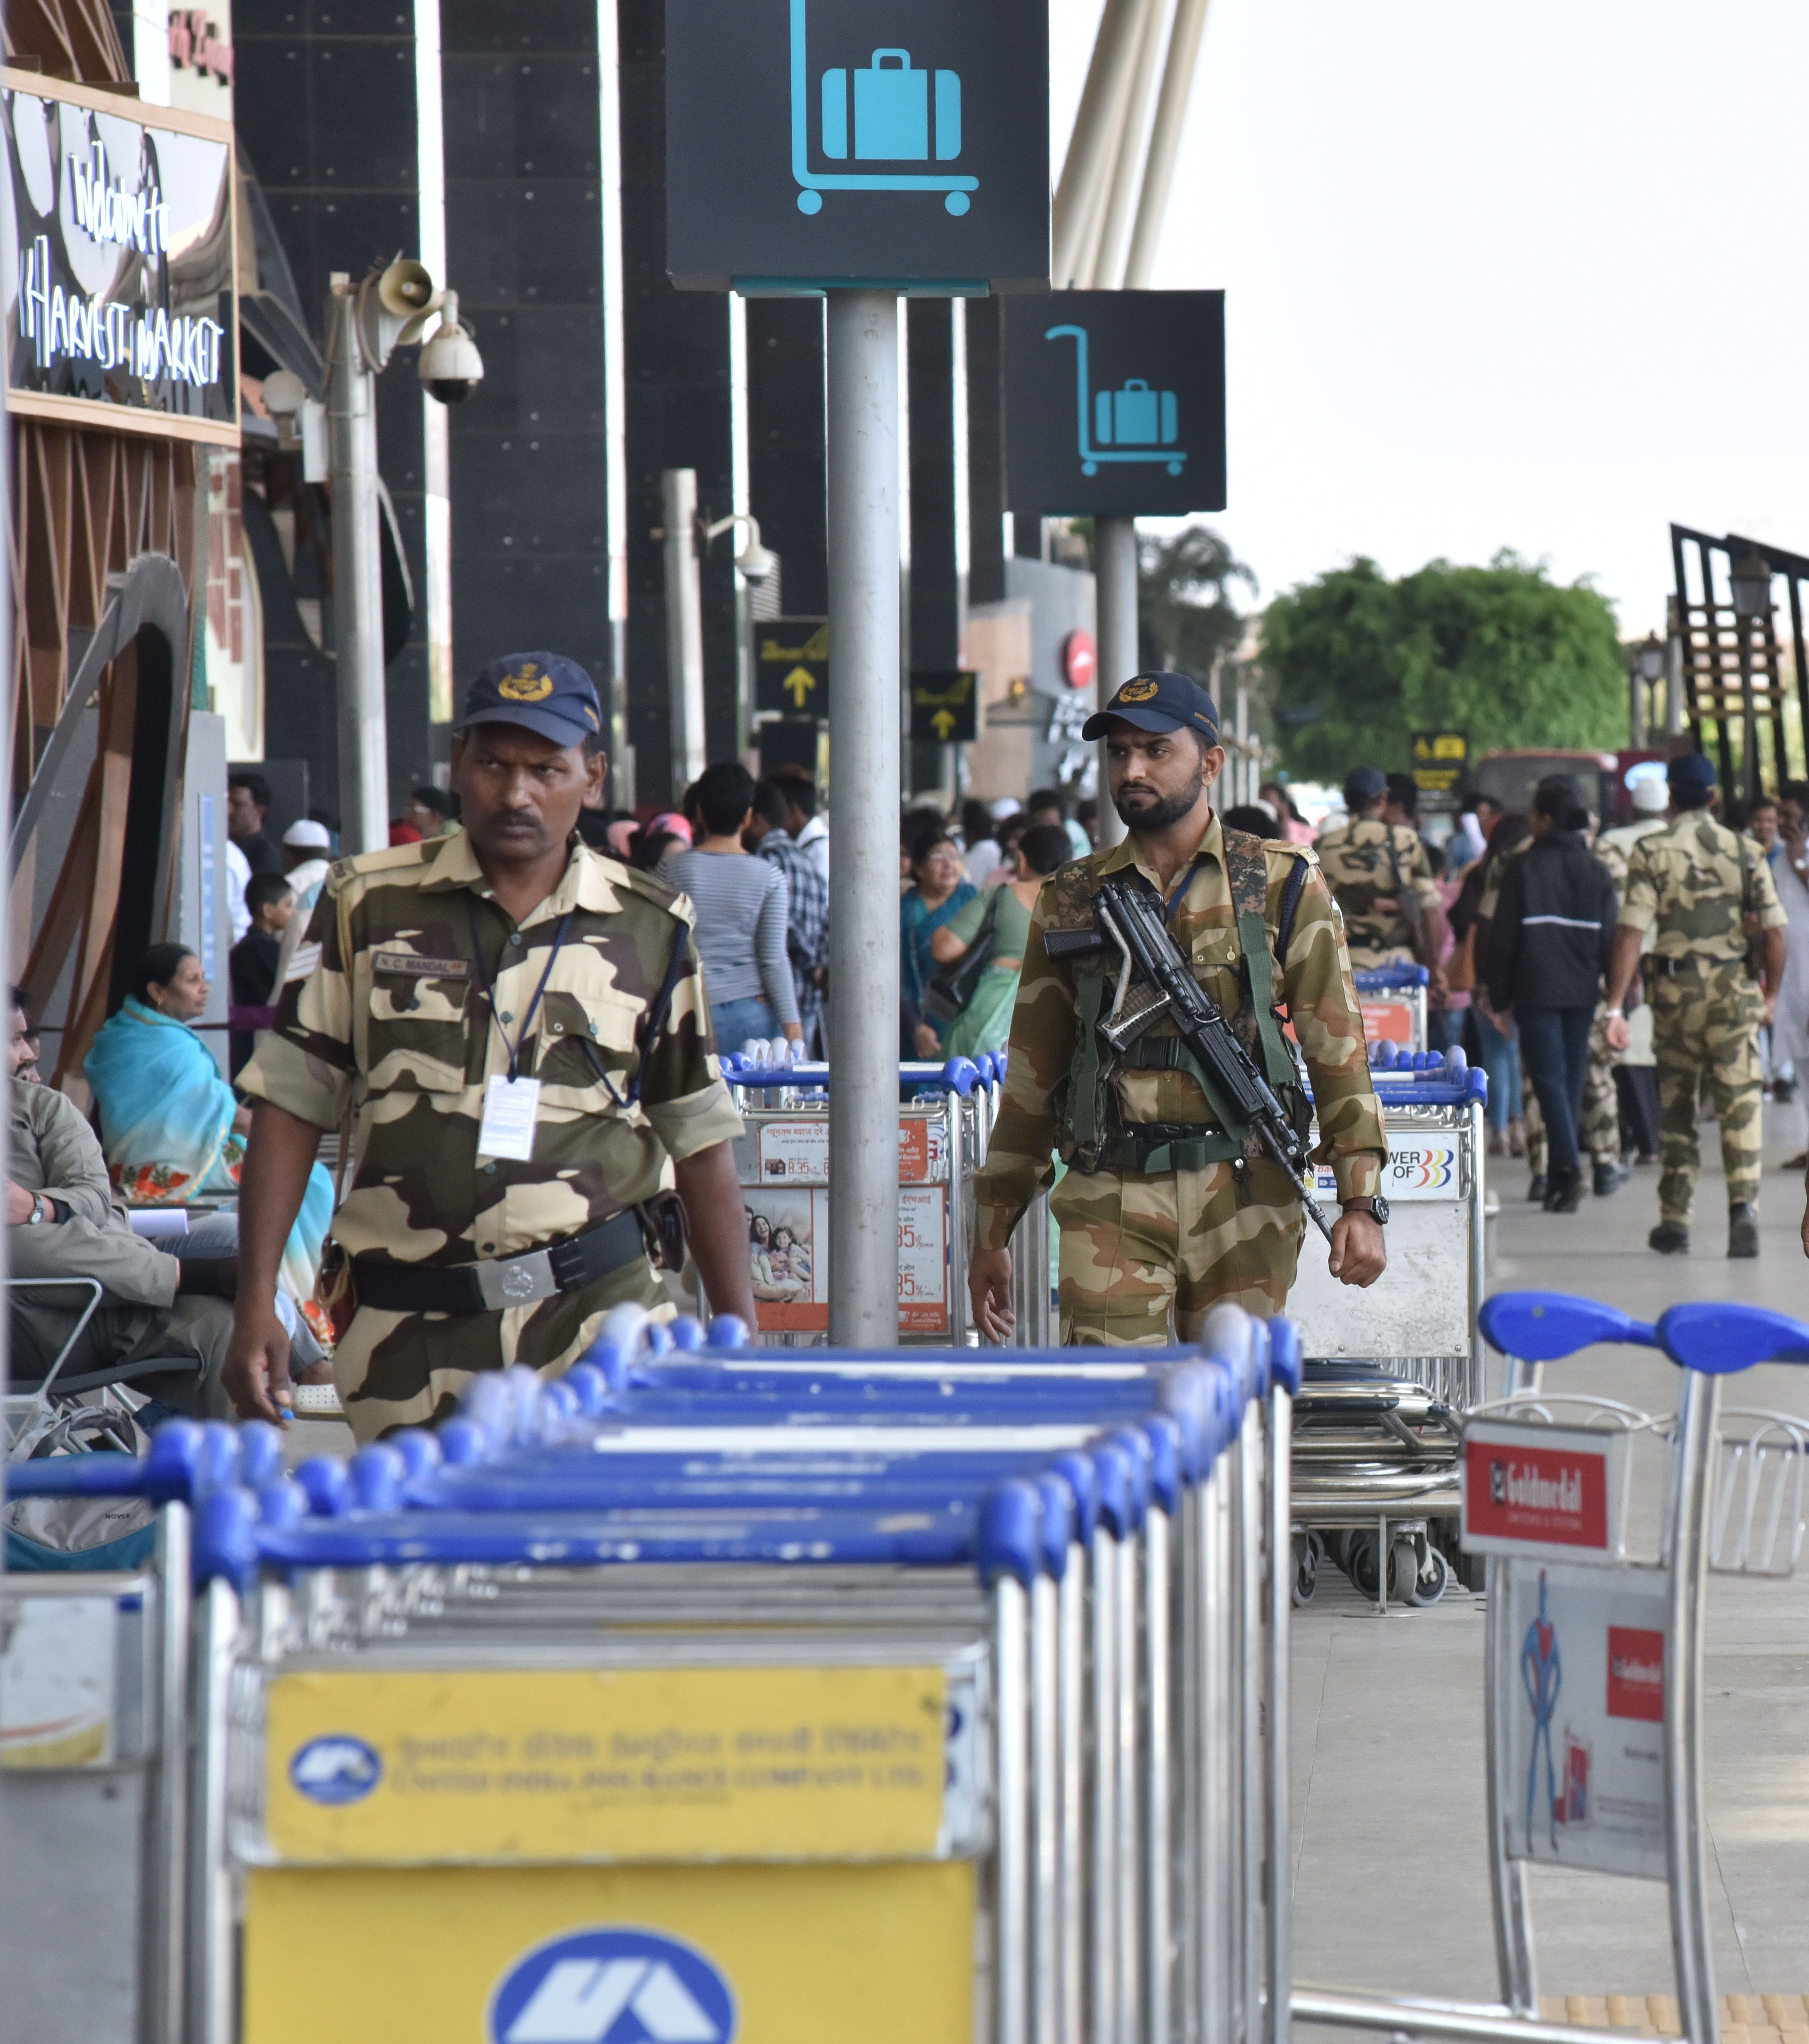 The Central Industrial Security Force gives tight security at Kempegowda International Airport. (DH Photo)